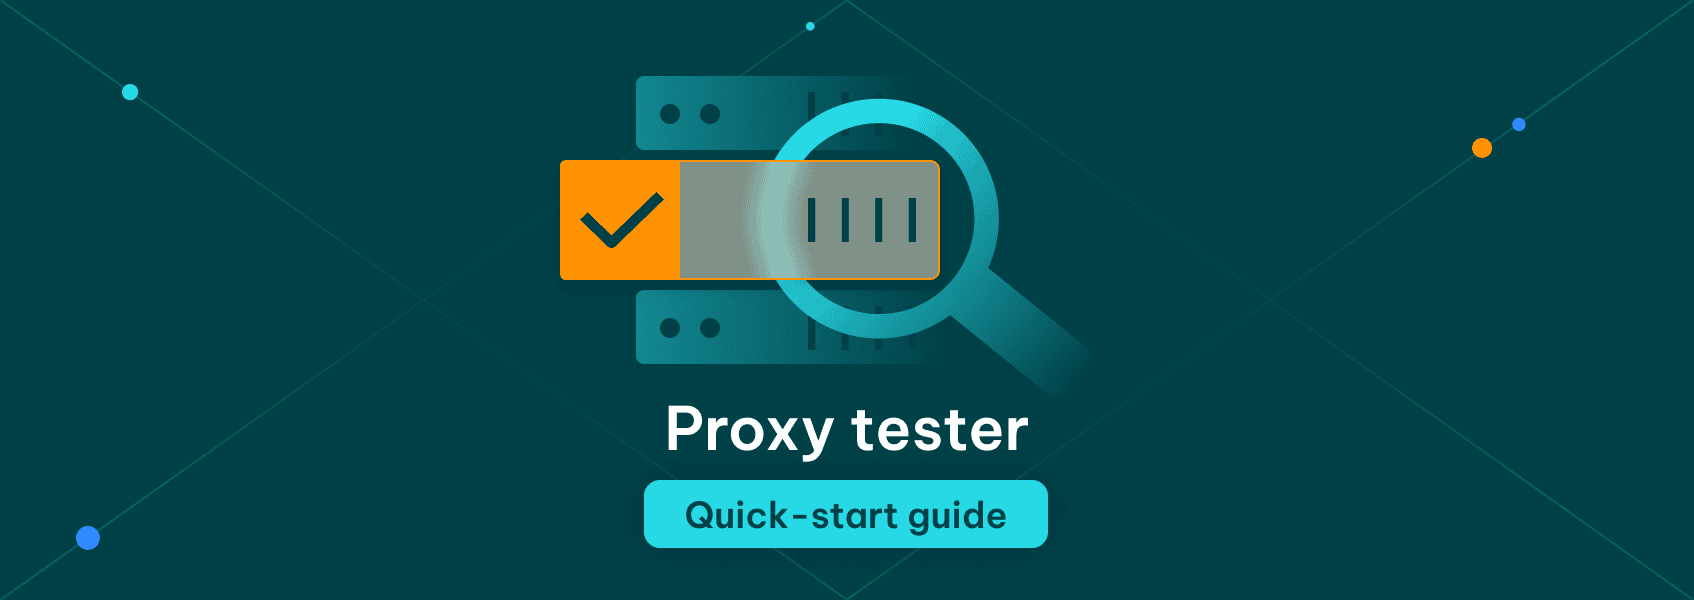 Proxy Tester Quick-Start Guide